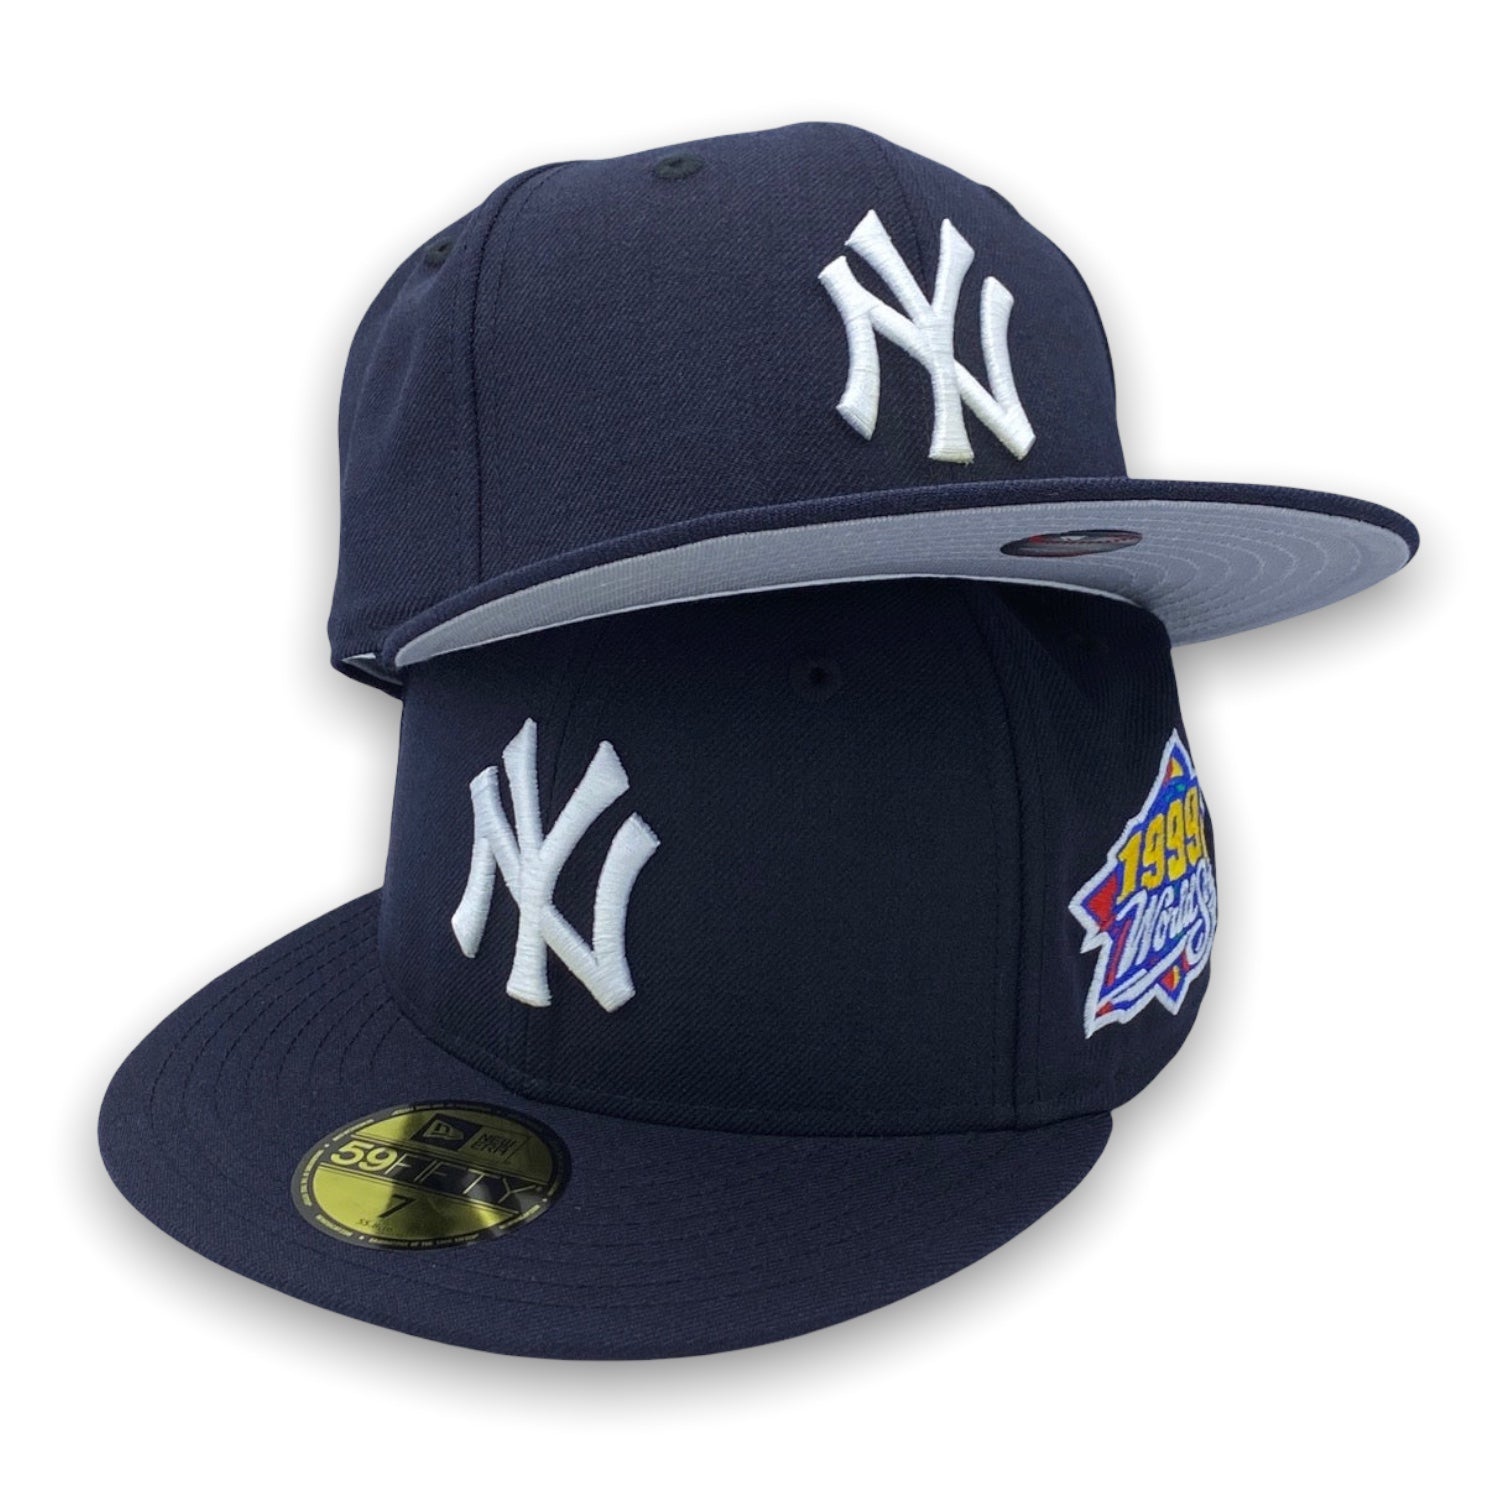 New York Era 59FIFTY World Series Navy Blue 1999 Yankees – Fitted USA KING Ha CAP New